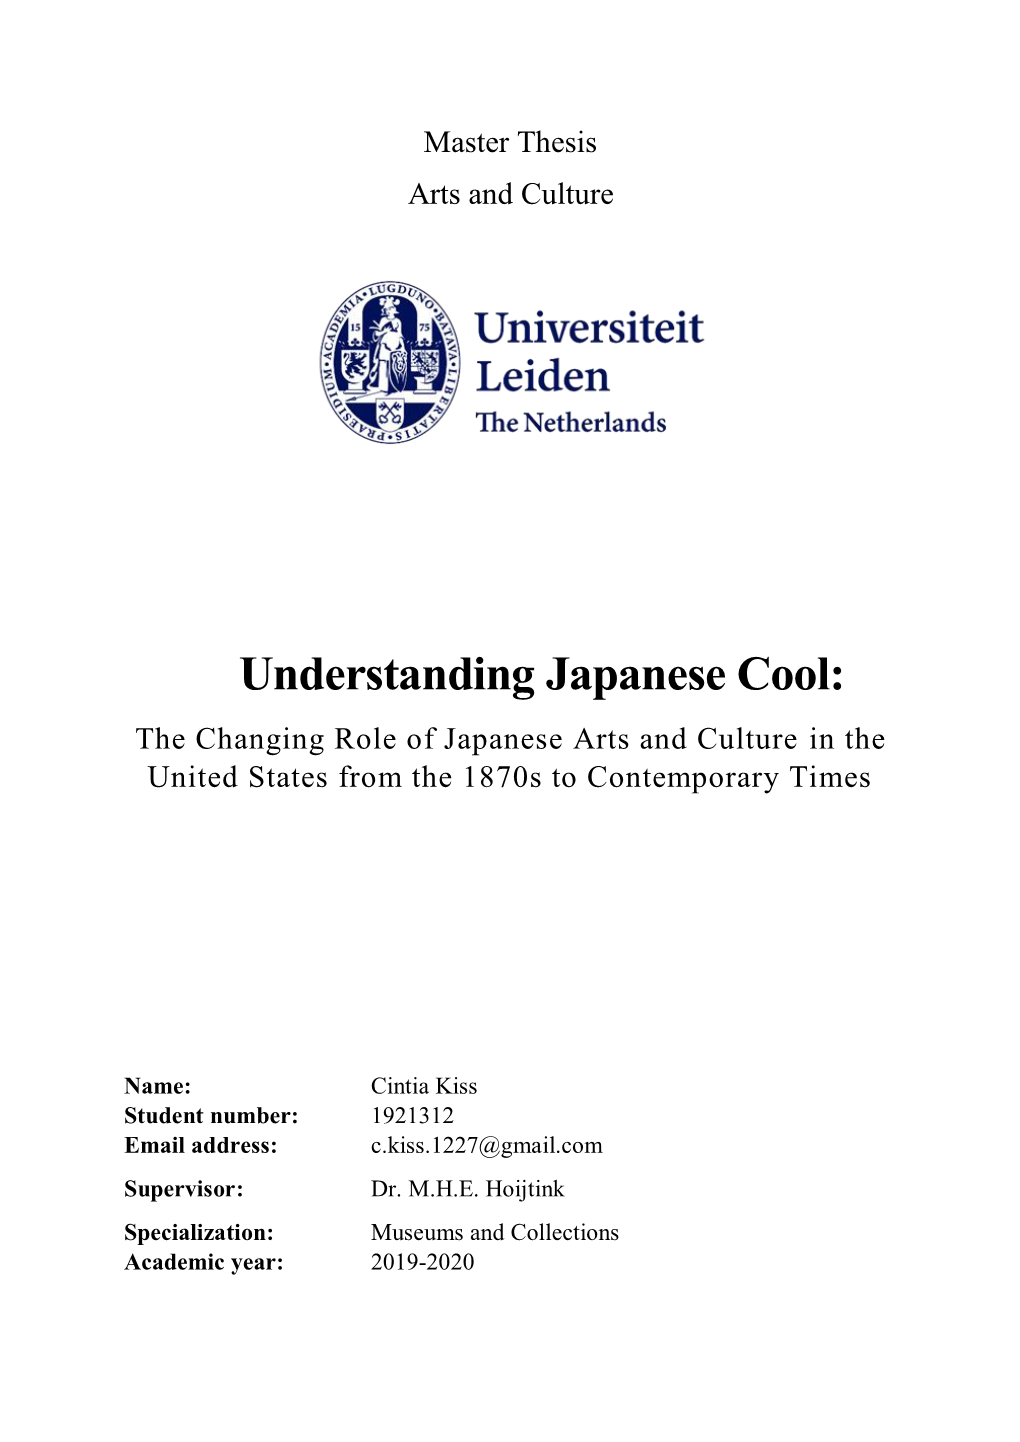 Understanding Japanese Cool: the Changing Role of Japanese Arts and Culture in the United States from the 1870S to Contemporary Times